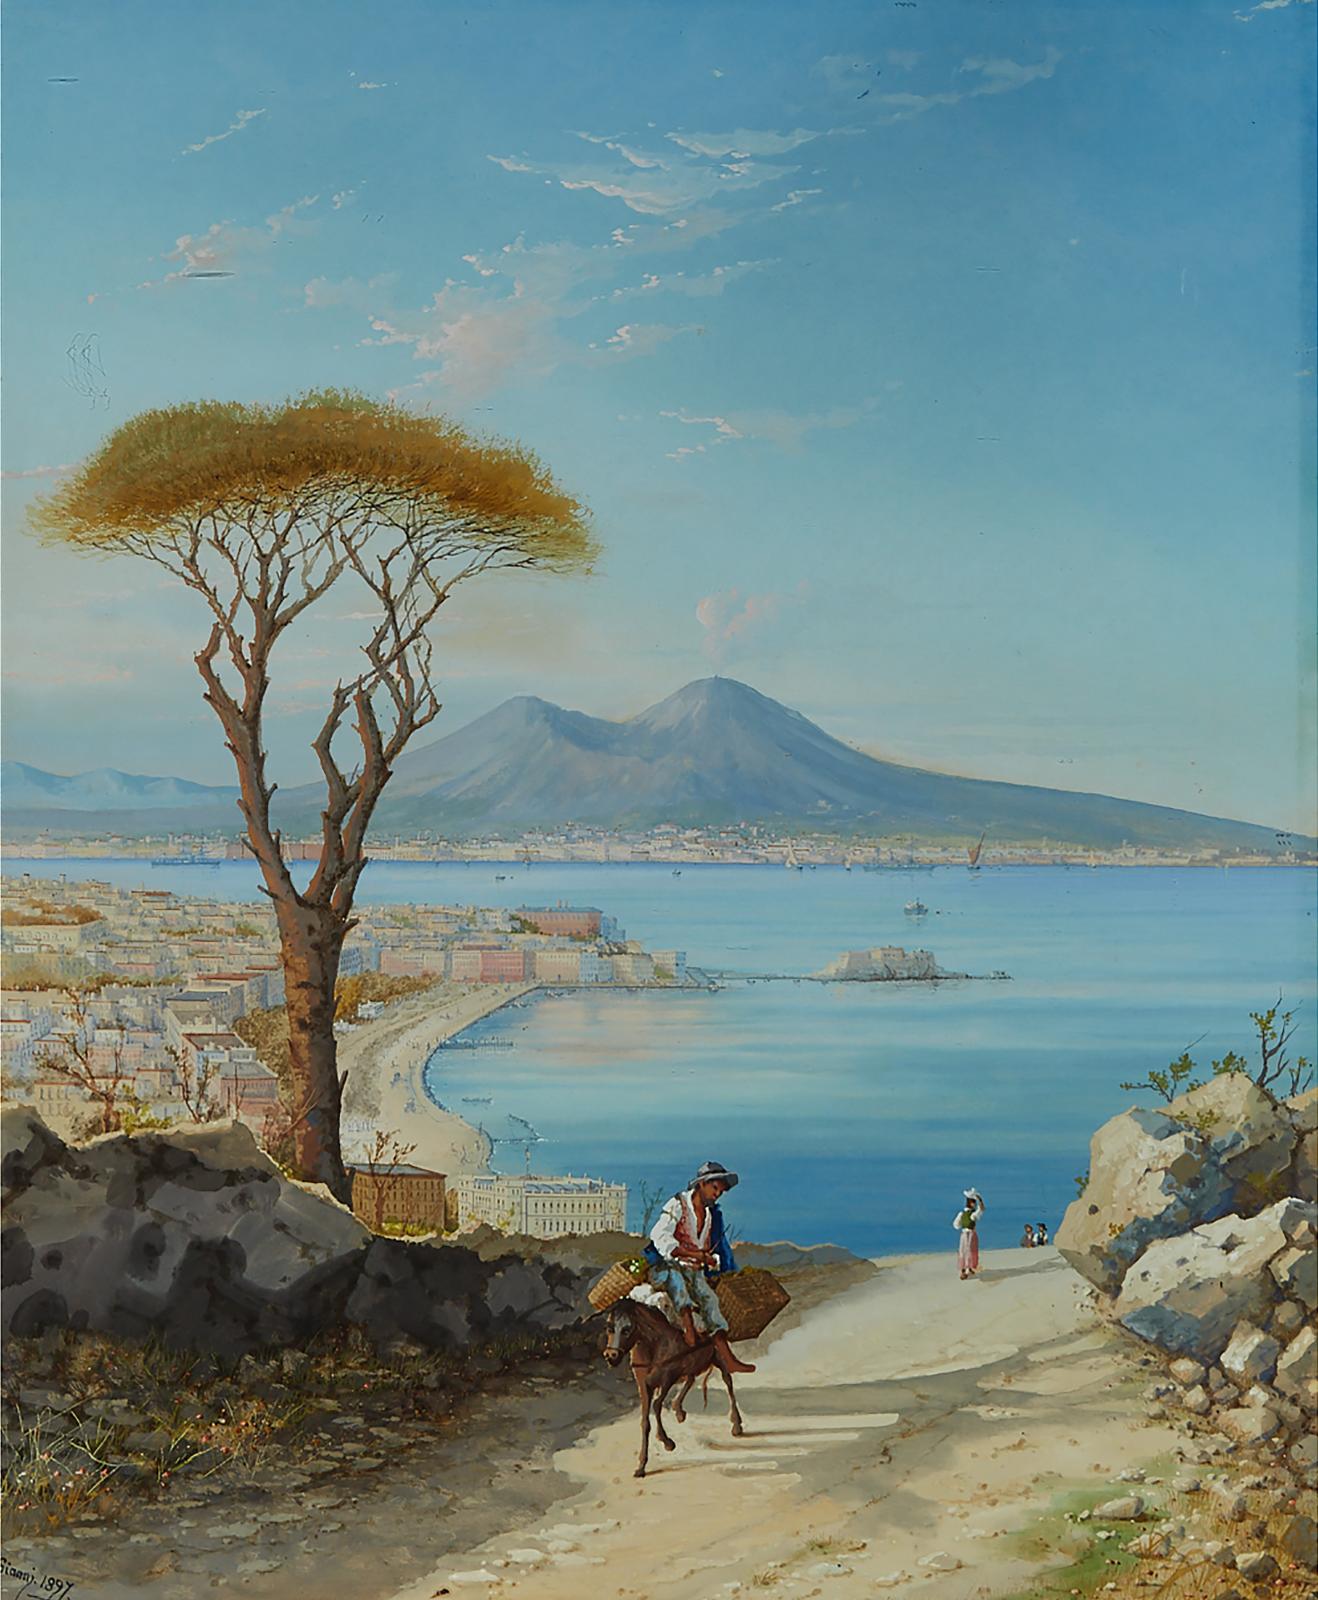 Maria Gianni (1873-1956) - Coast Of Naples With Mount Vesuvius Erupting, A Man On A Donkey In The Foreground, 1897